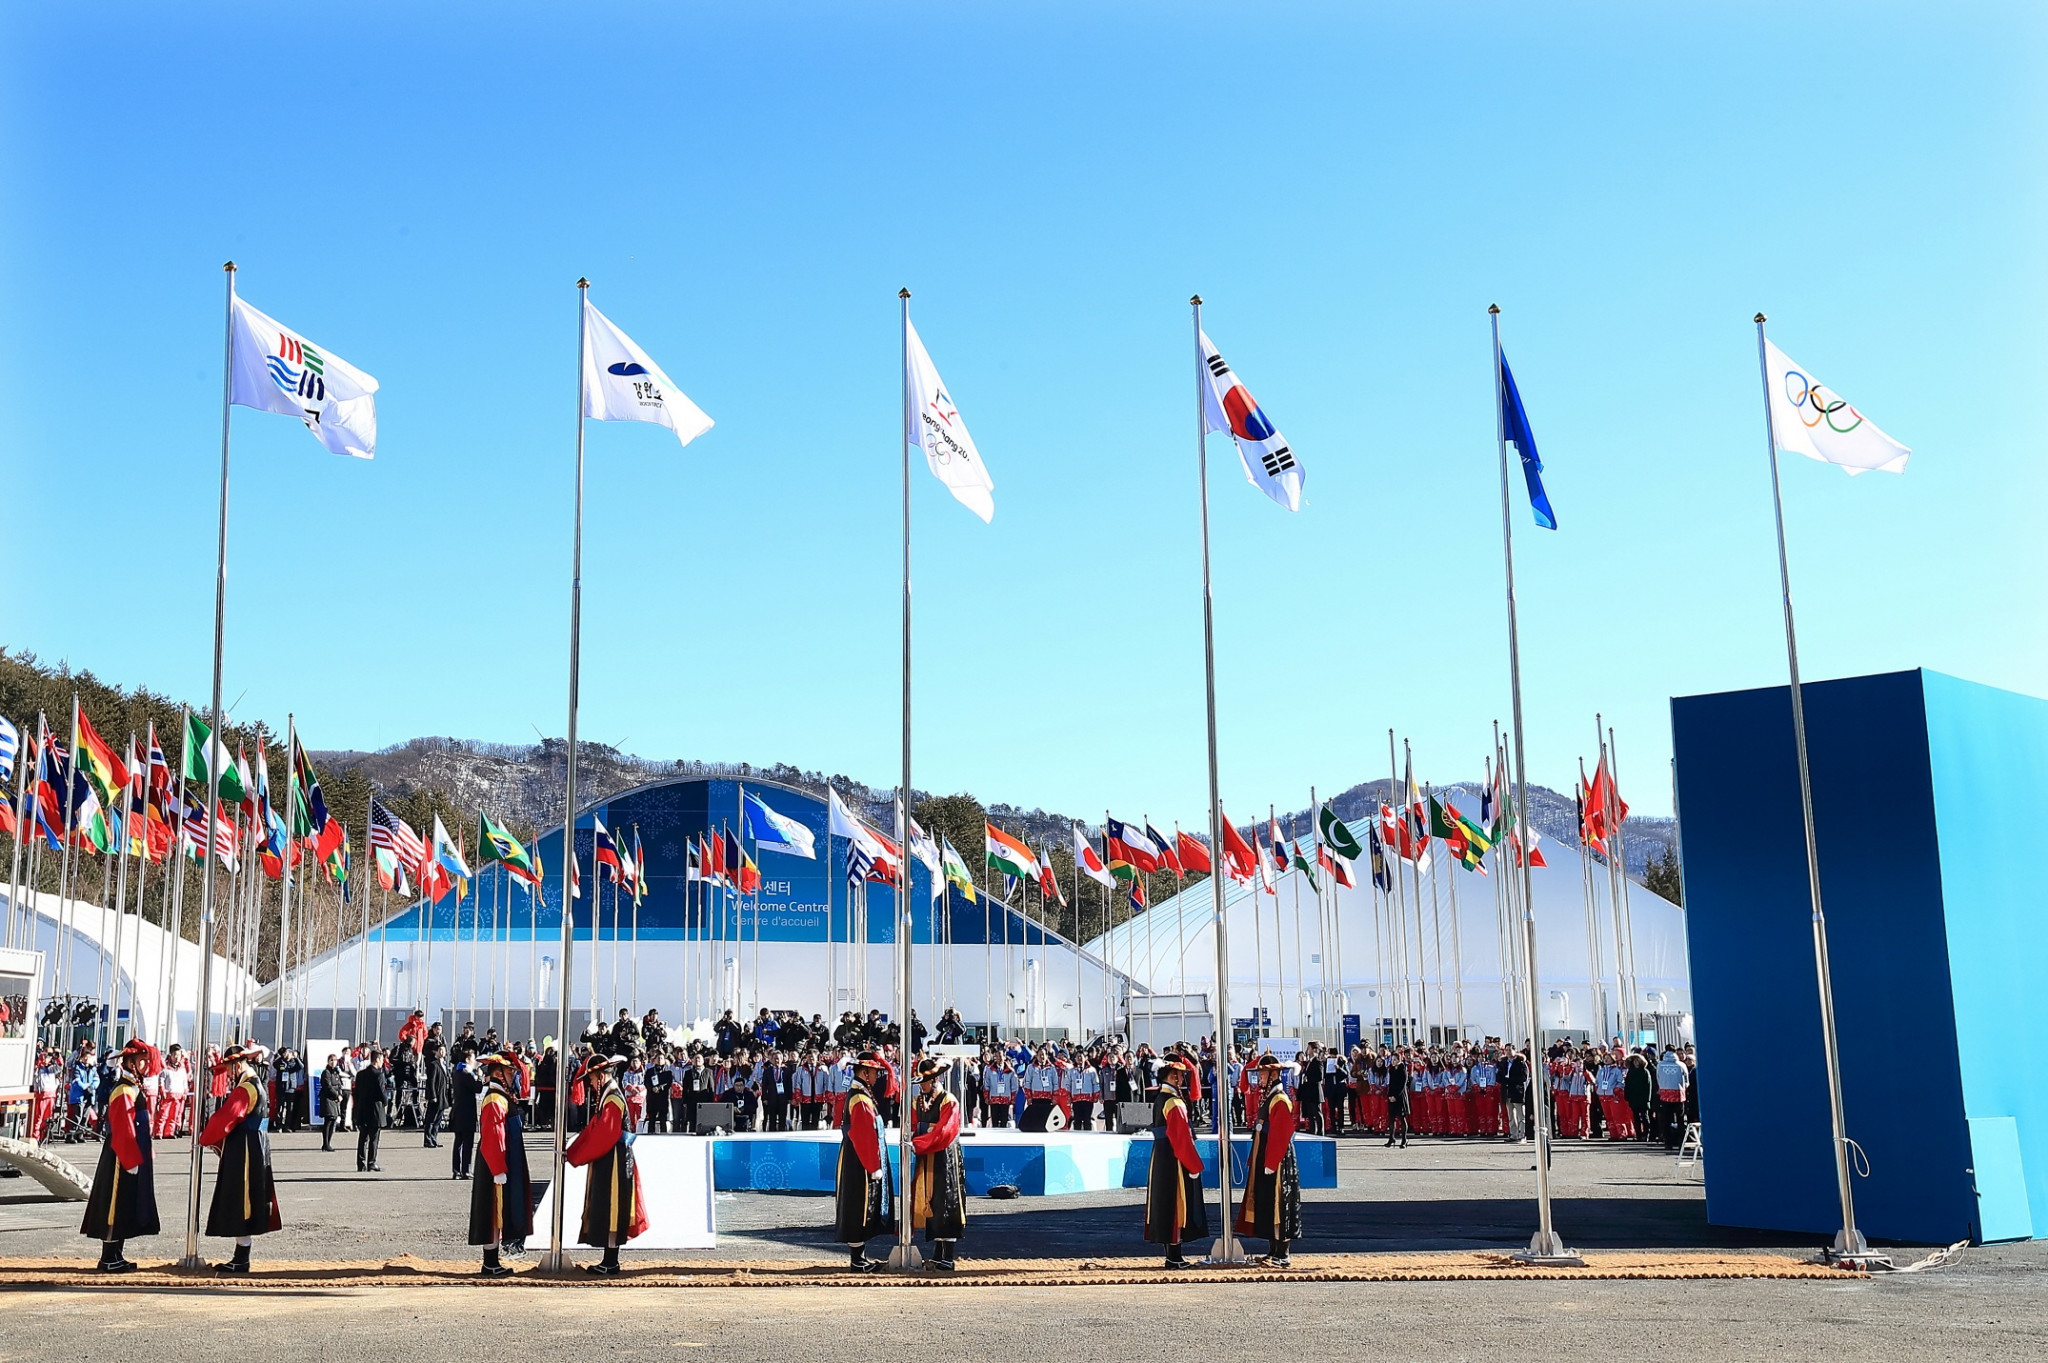 The Olympic Flag was raised during the Ceremony ©Pyeongchang 2018